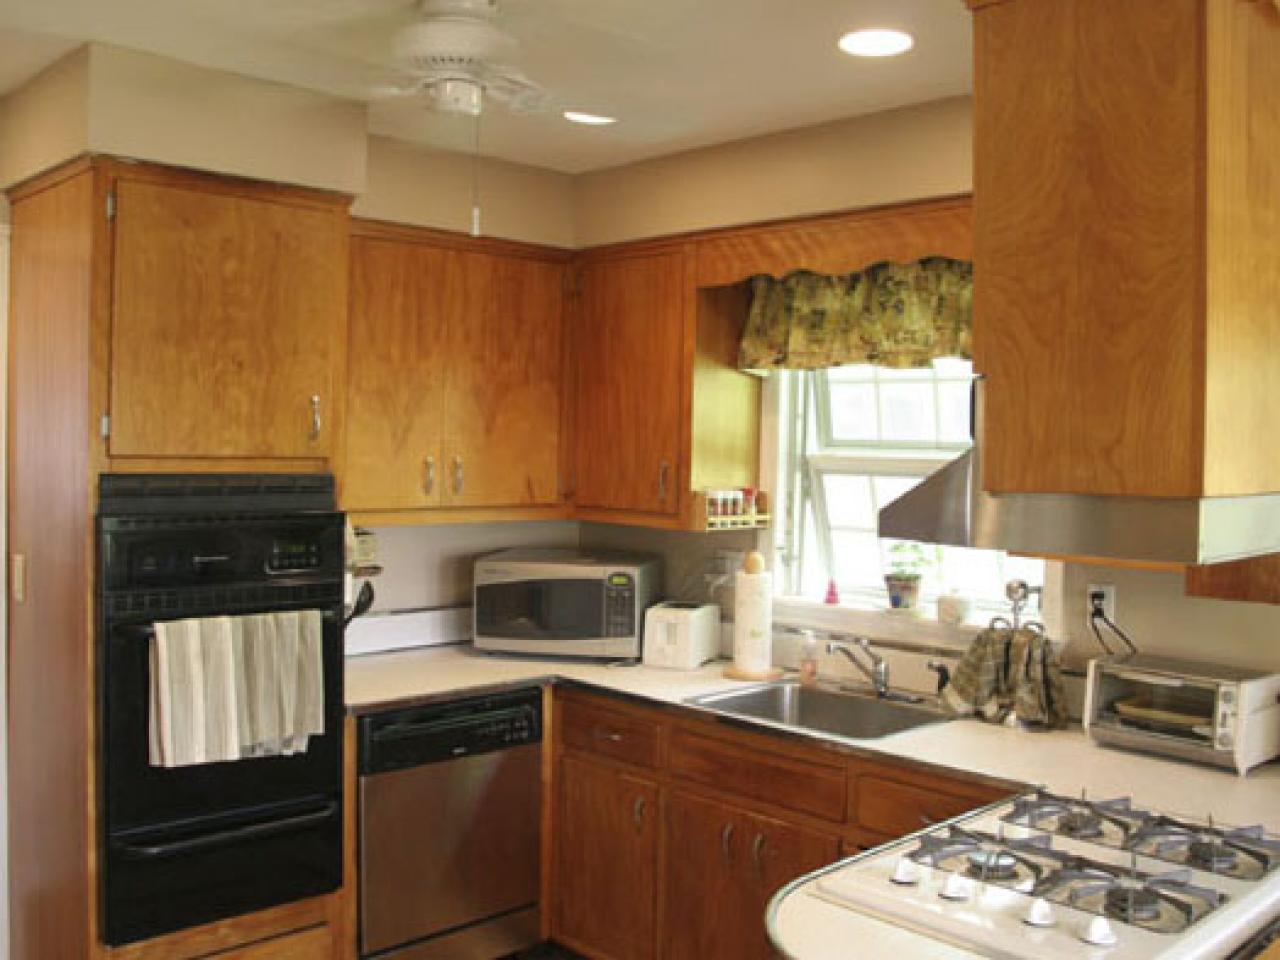 Kitchen Cabinets A Makeover, How To Change The Color Of Stain On Your Kitchen Cabinets